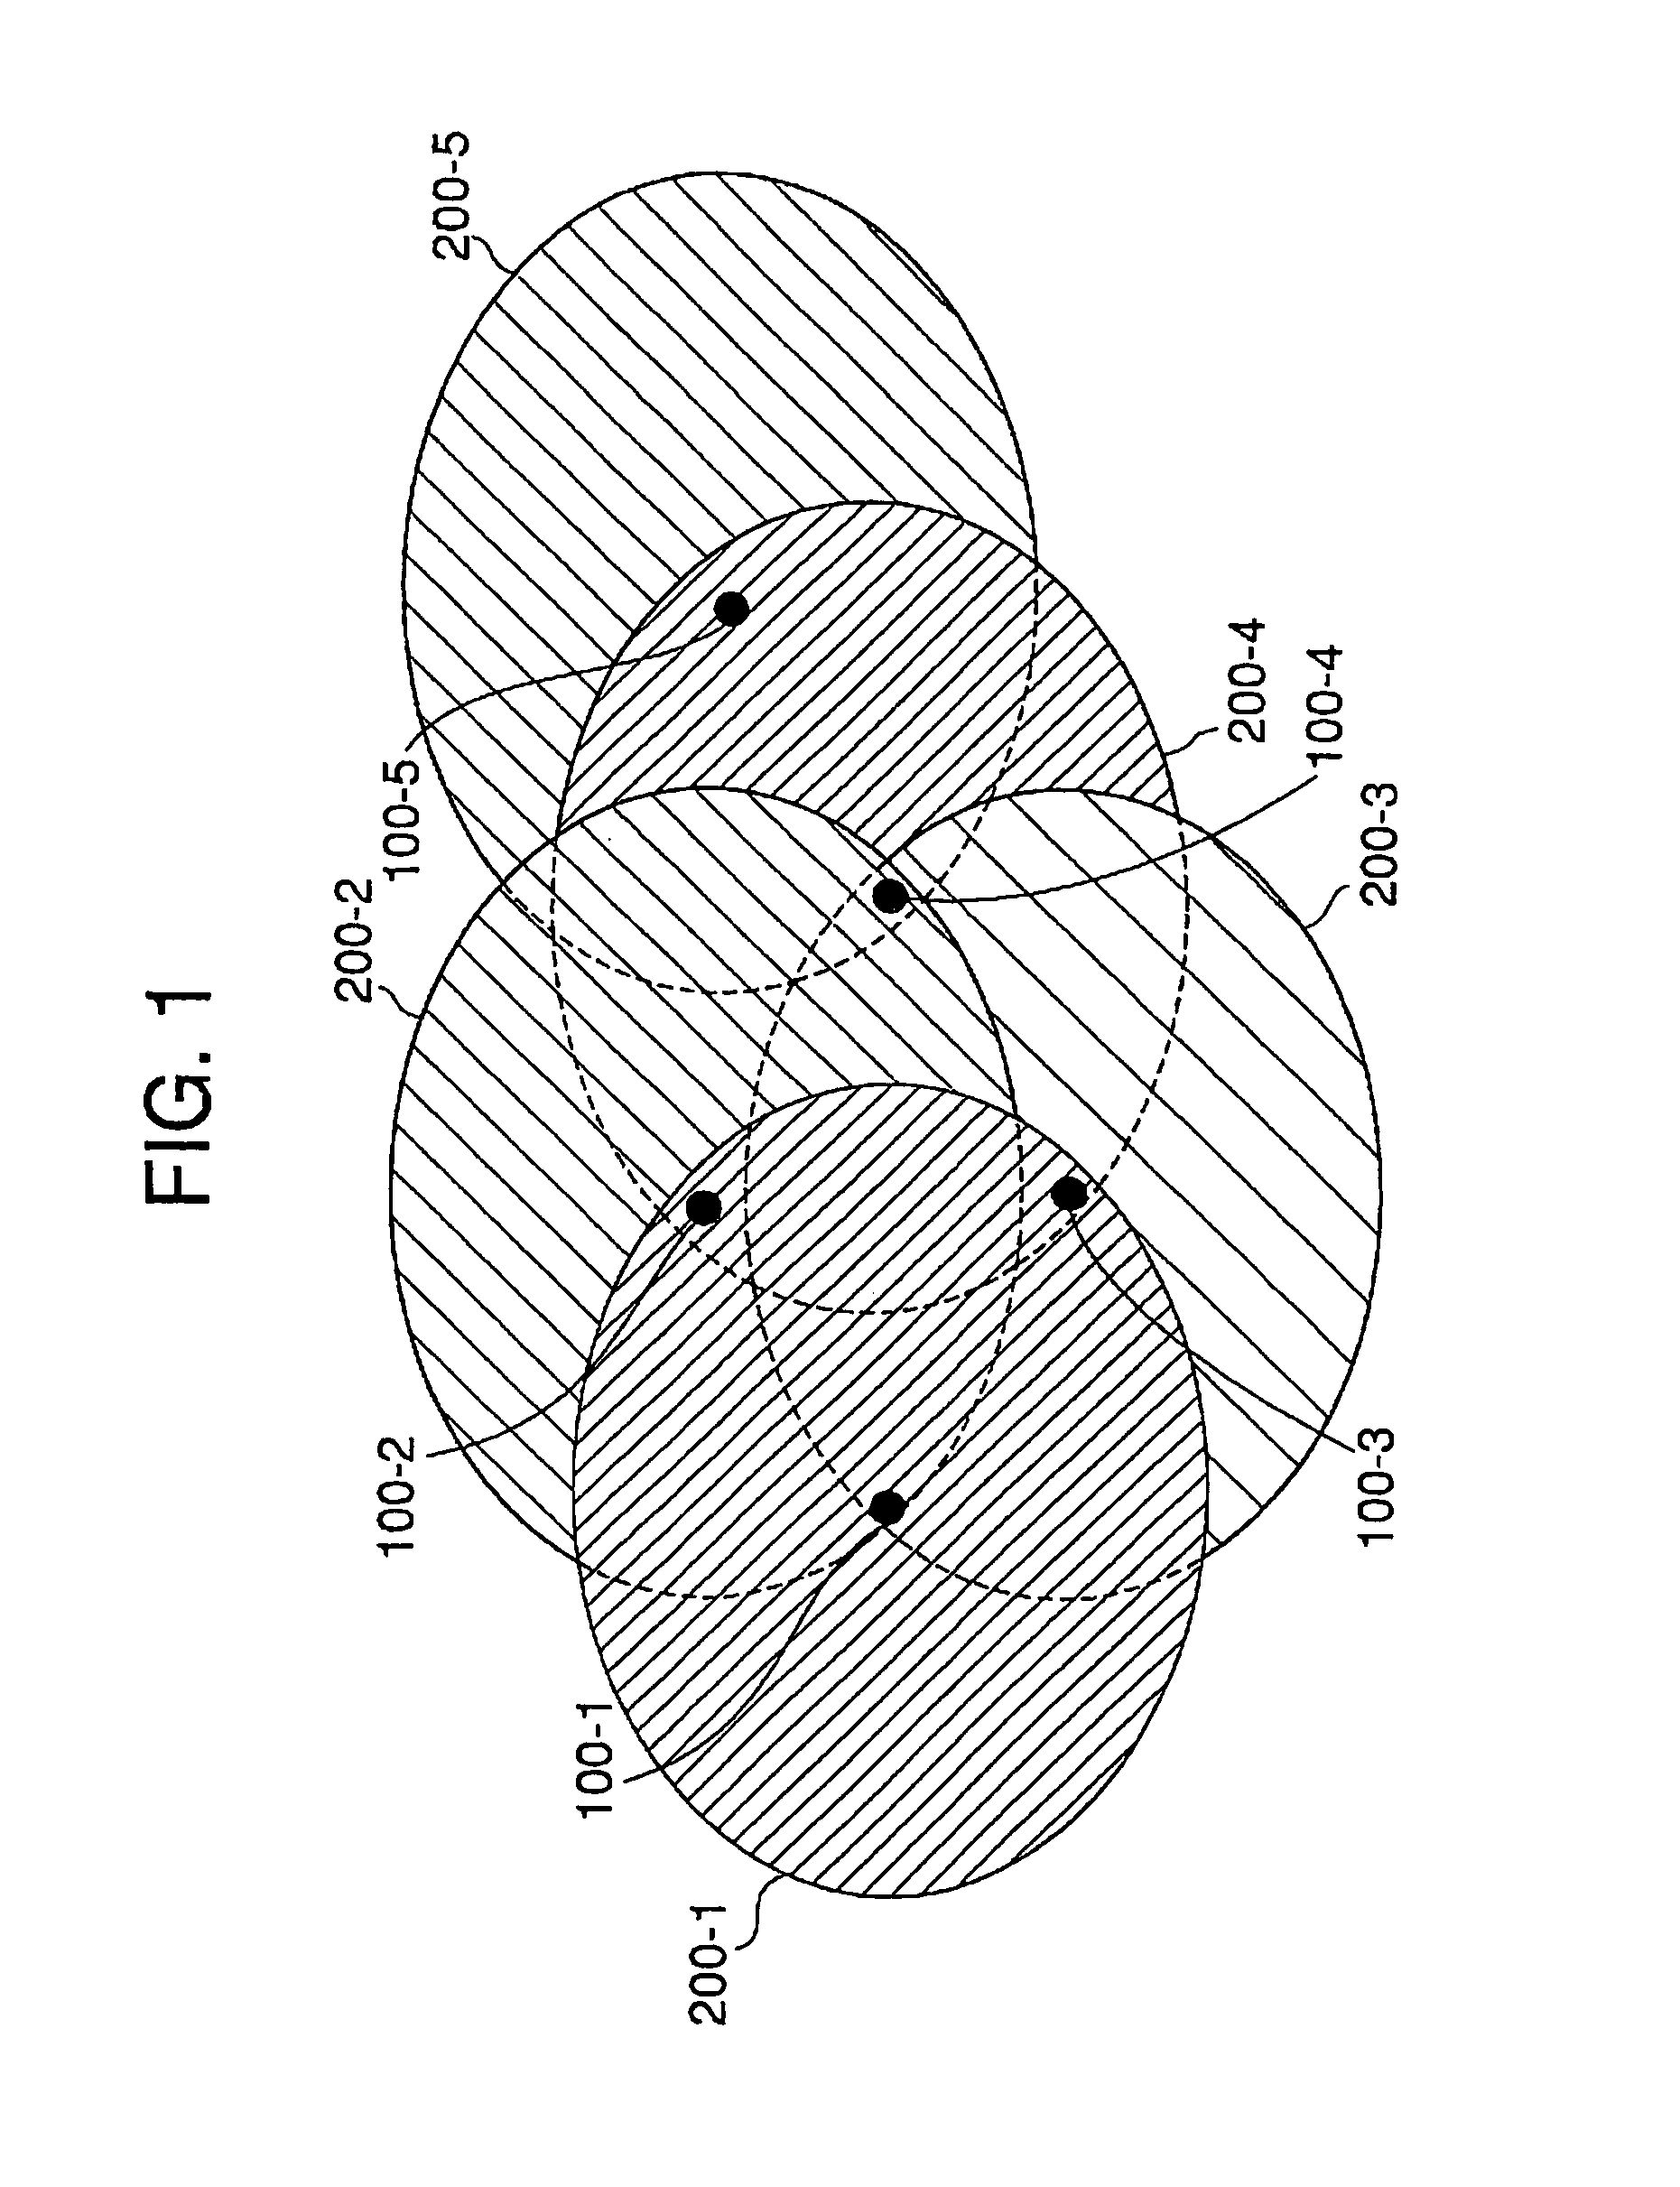 Wireless LAN base station capable of carrying out automatic matching for radio channels